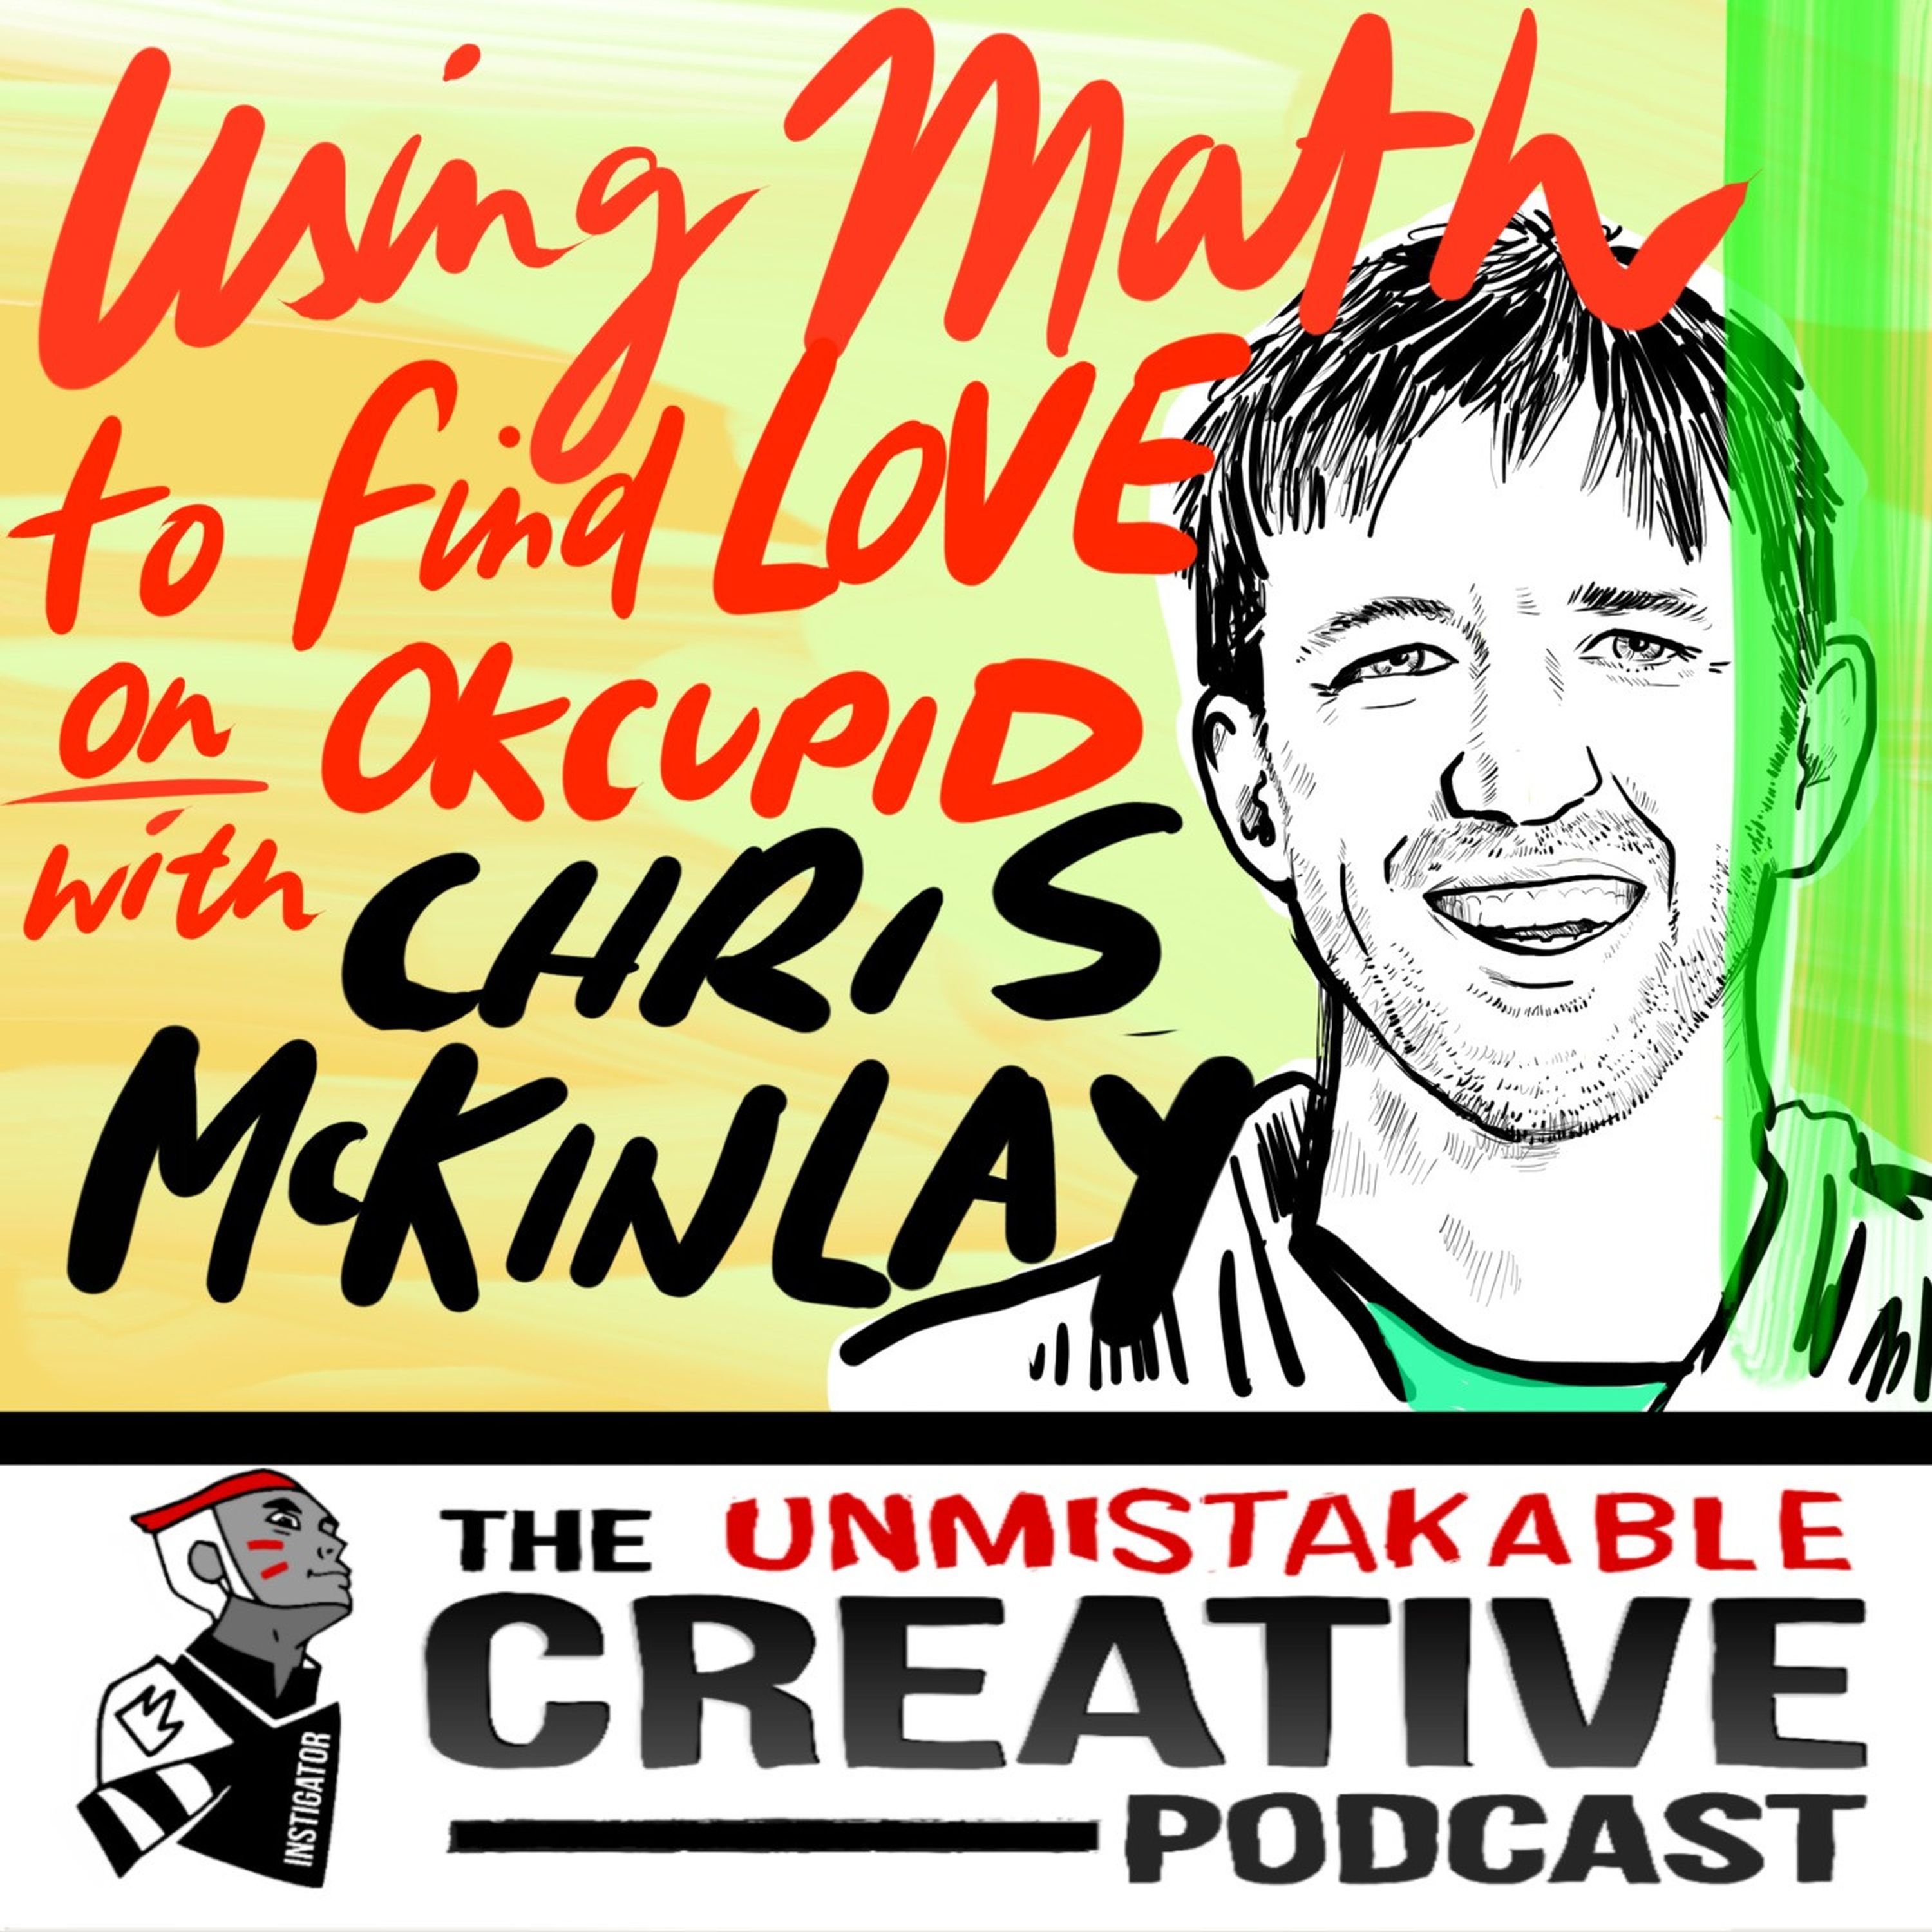 Using Math to Find Love on OkCupid with Chris Mcinklay Image